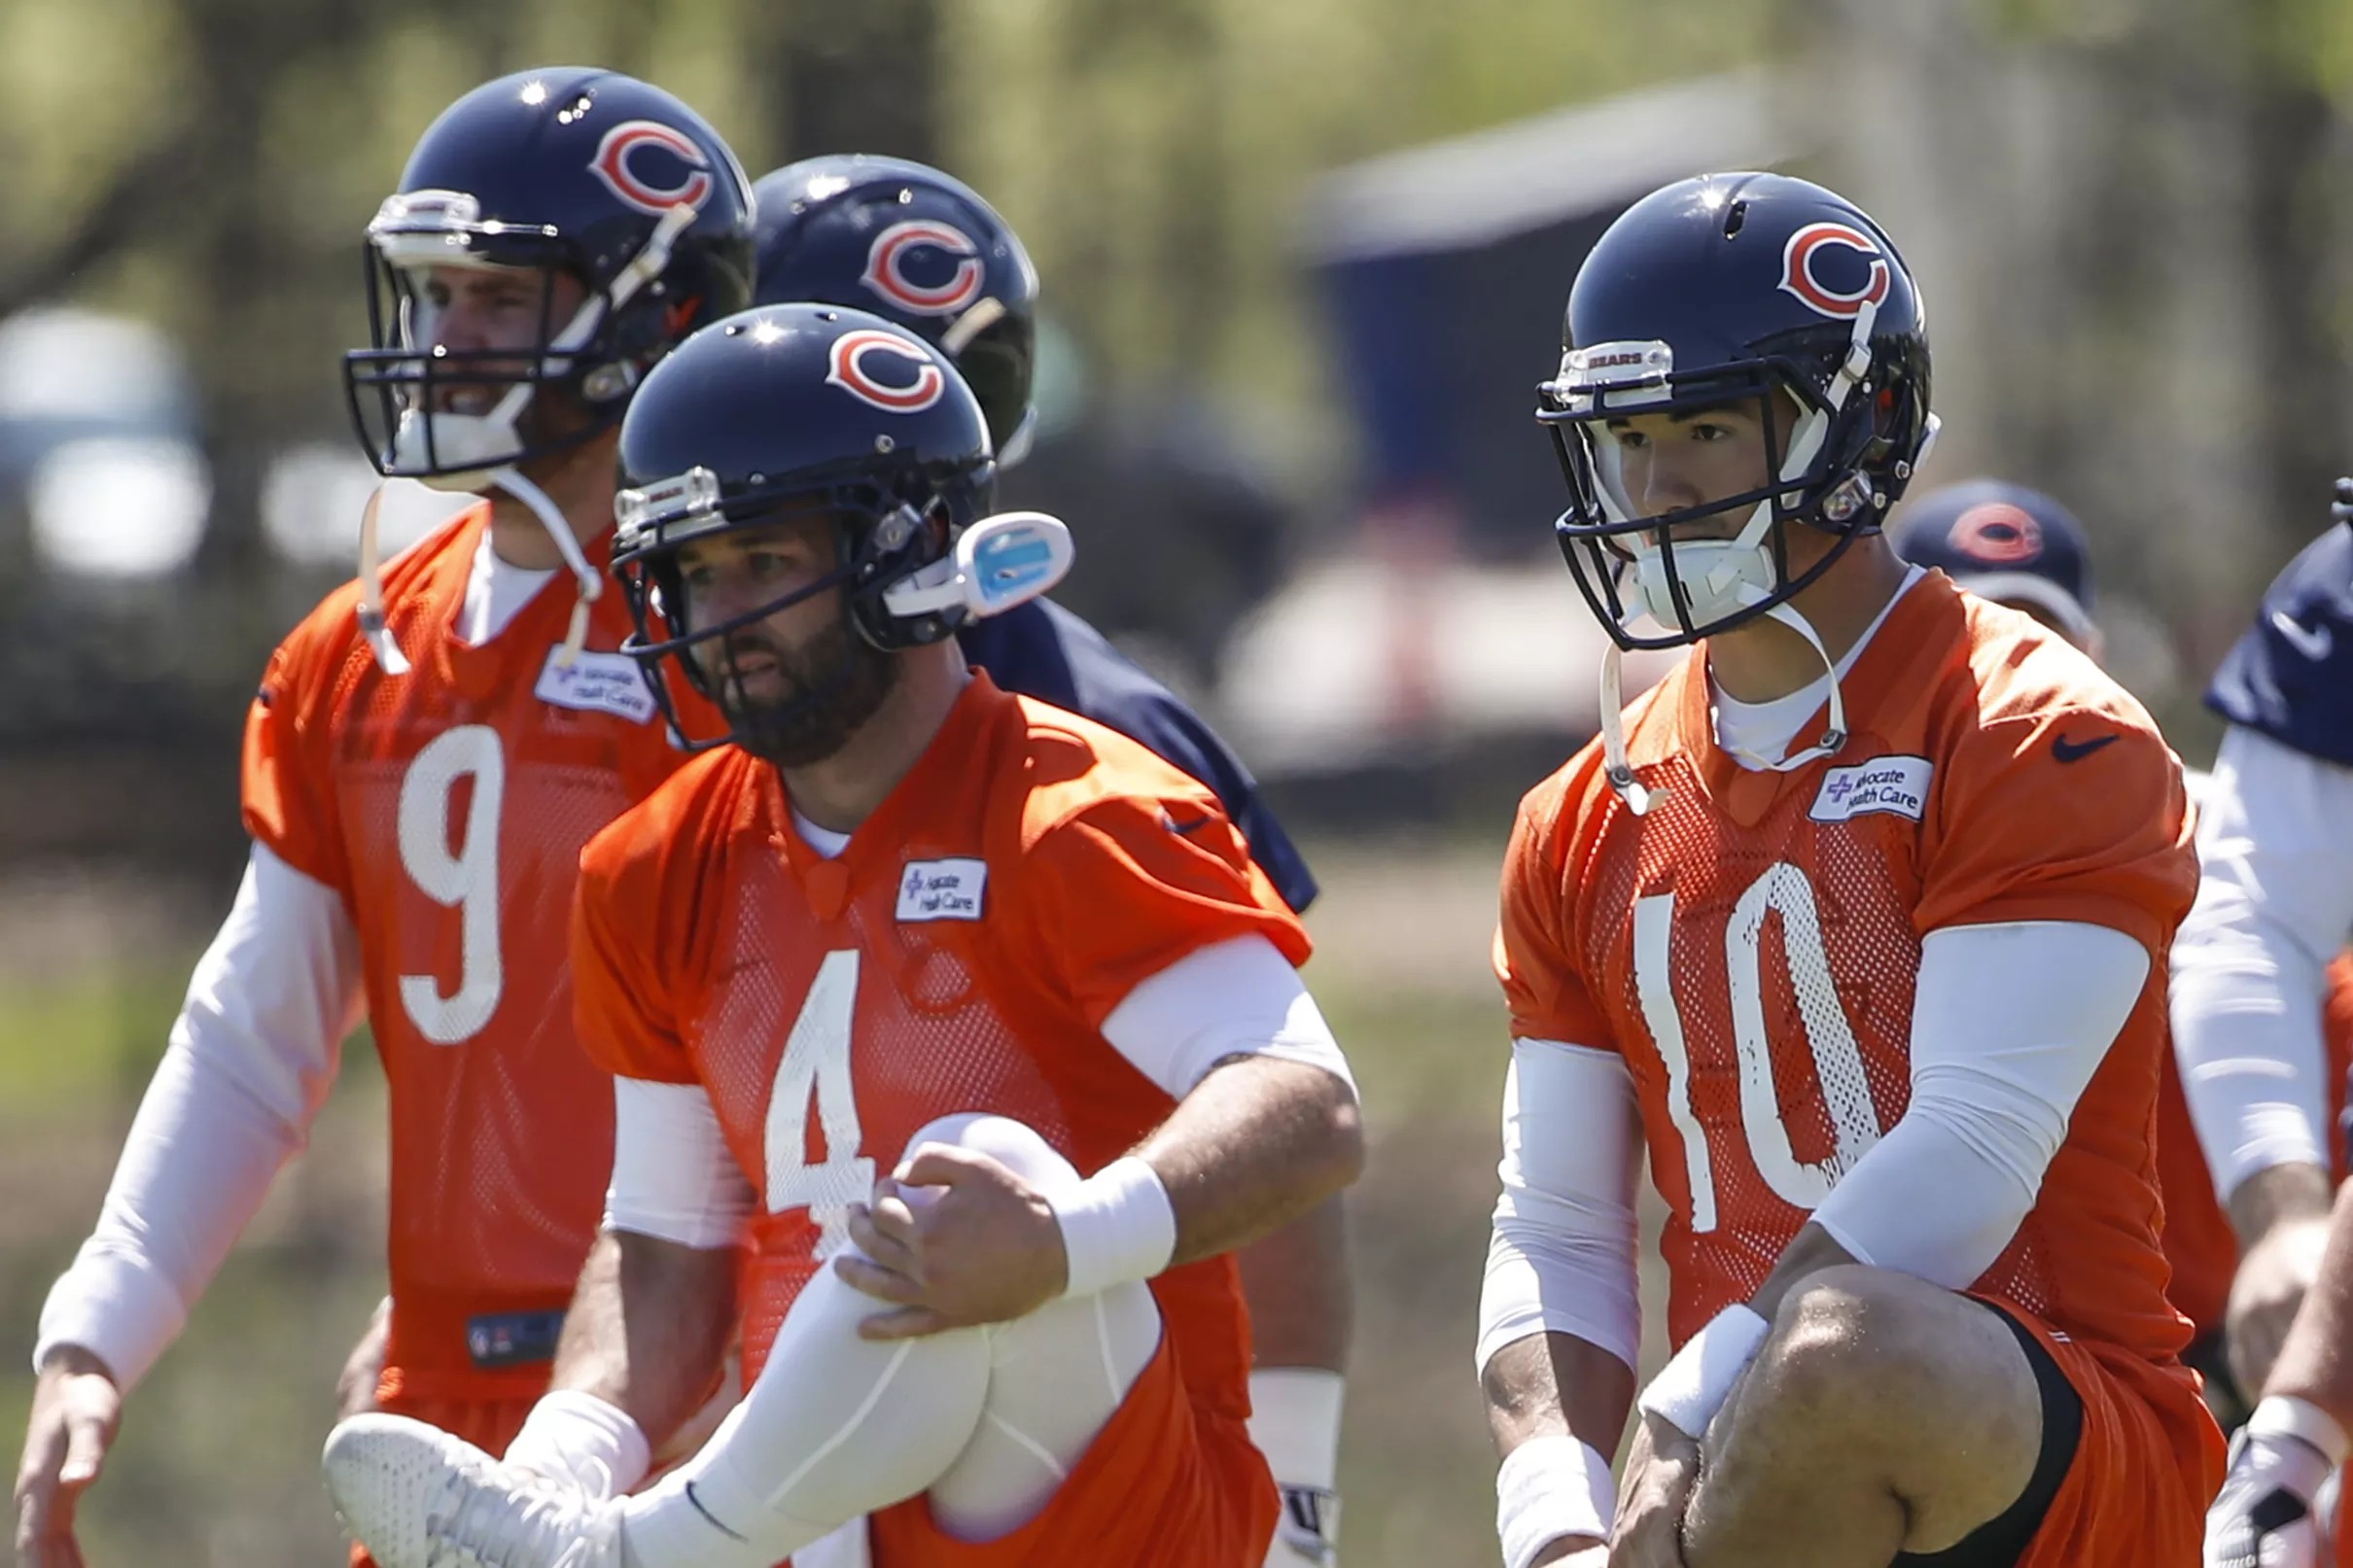 Chicago Bears quarterbacks ranked 29th in the NFL